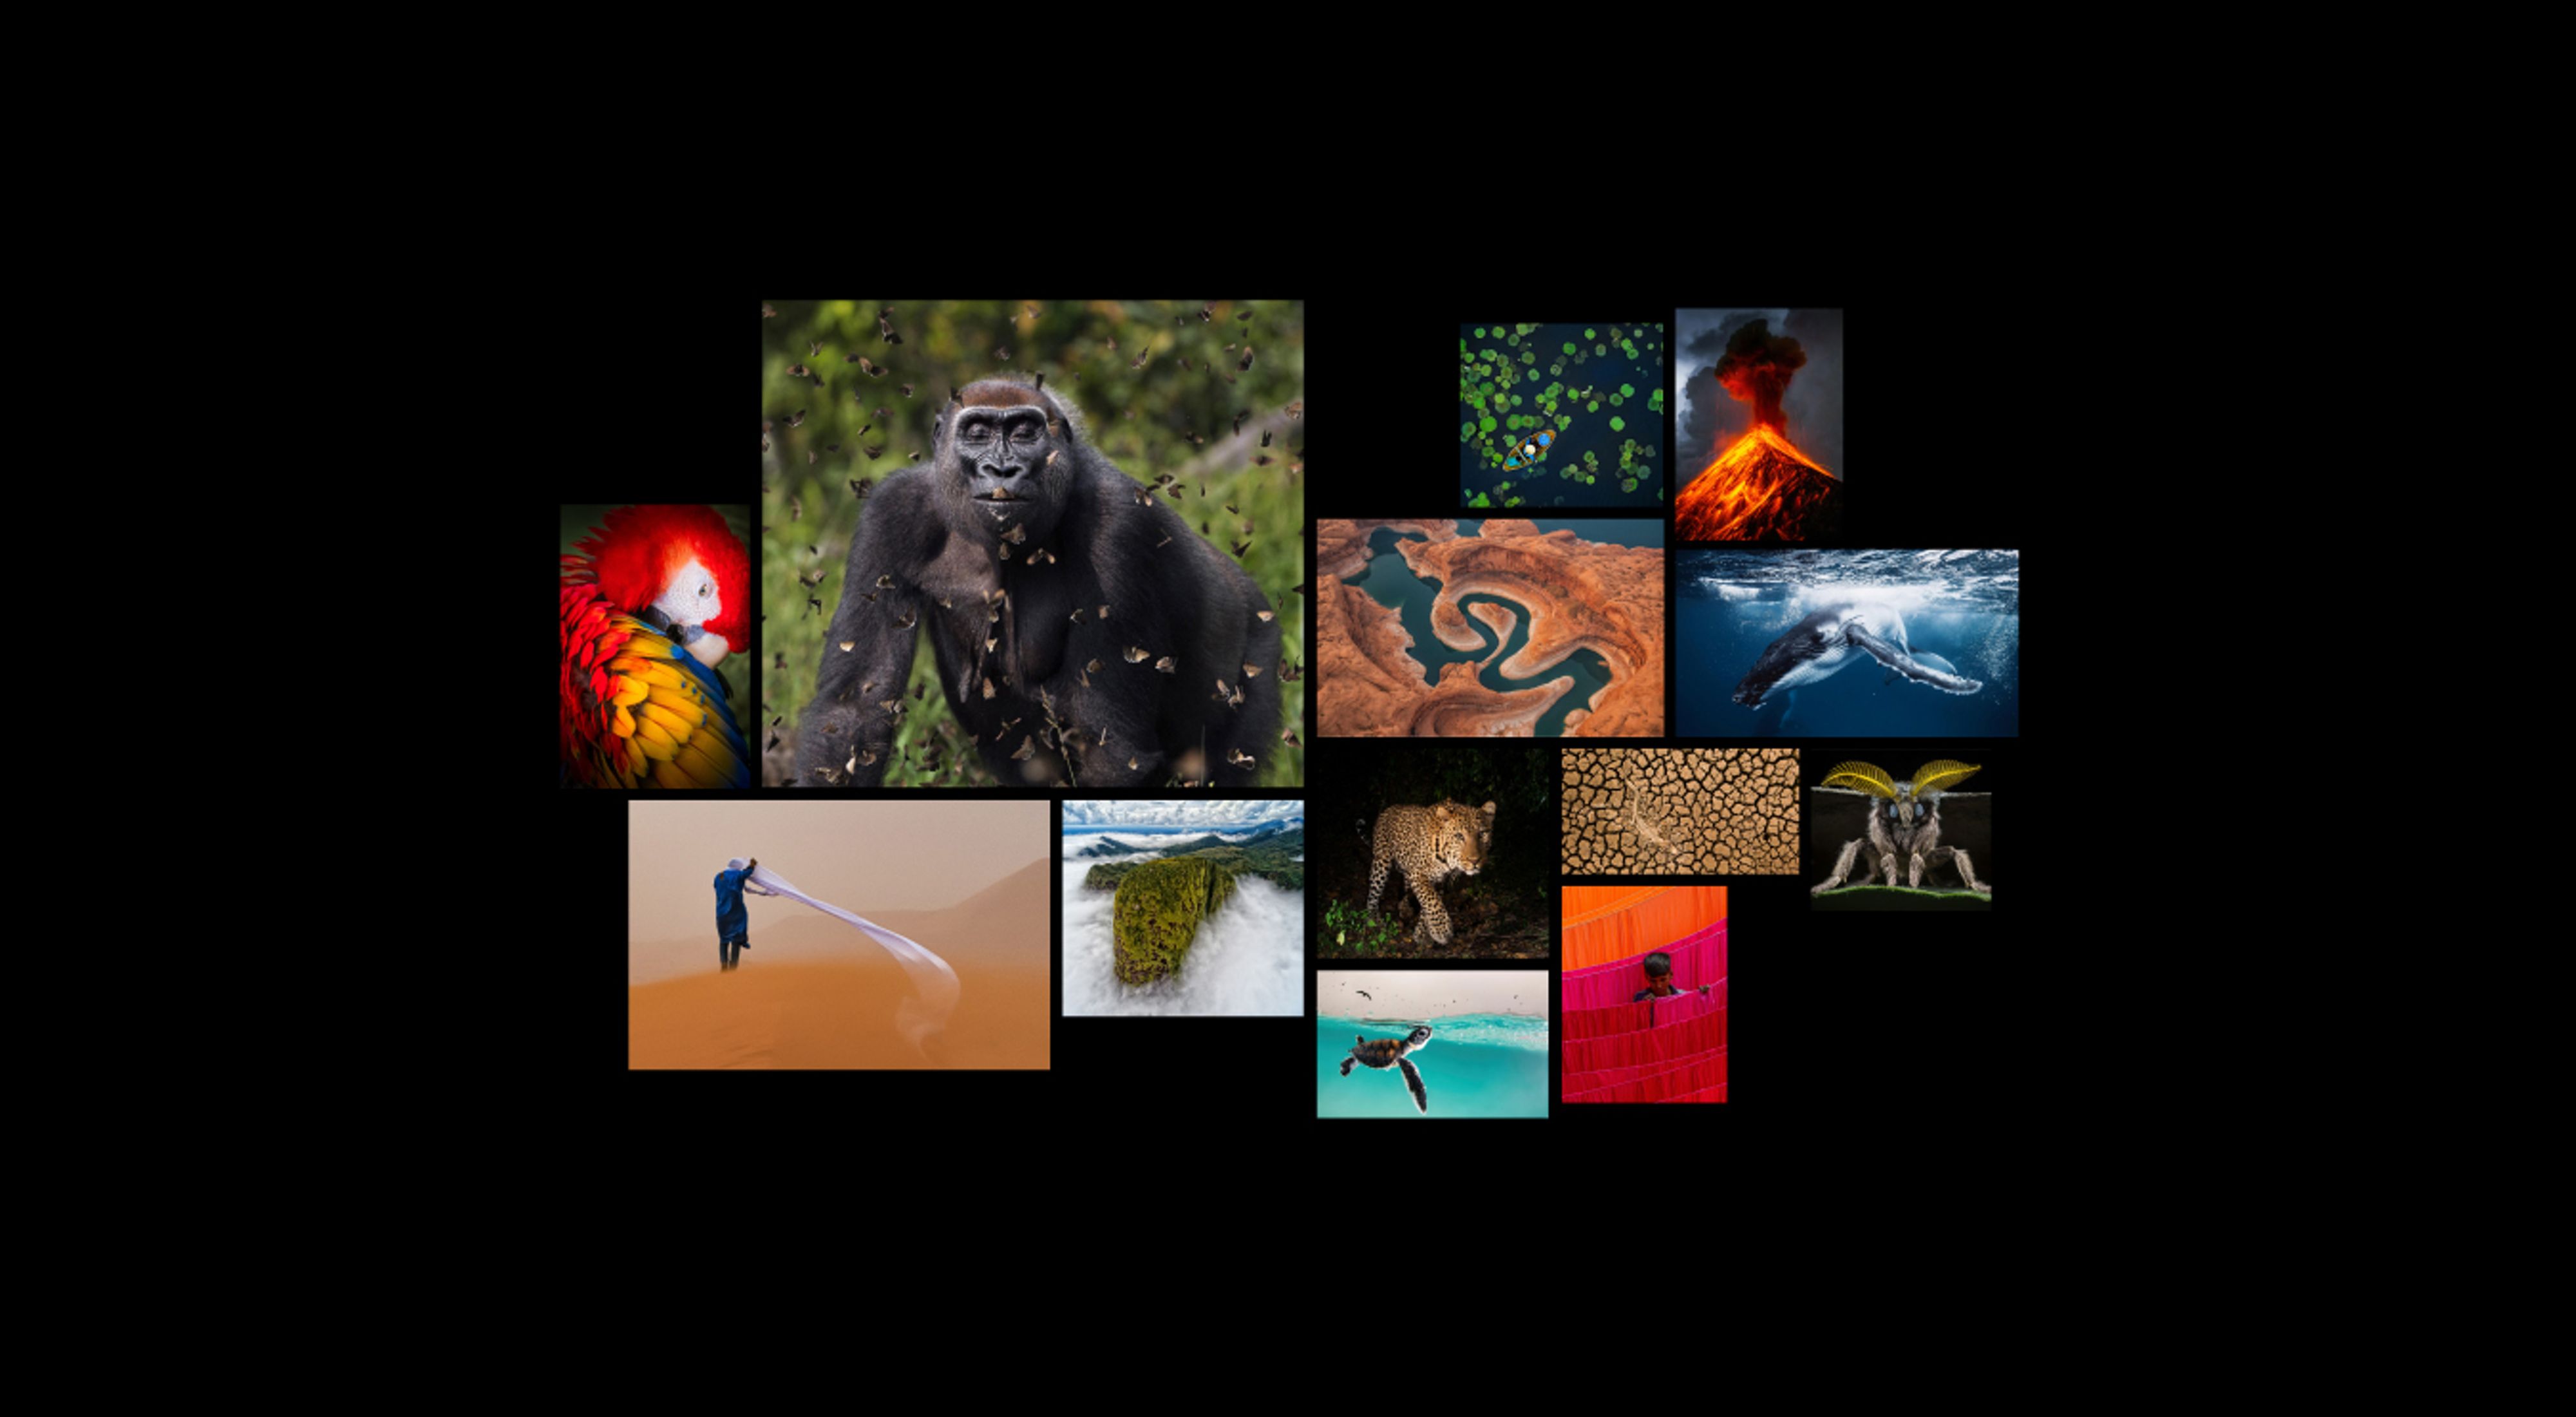 Collage of winning images from the 2021 Global Photo Contest.